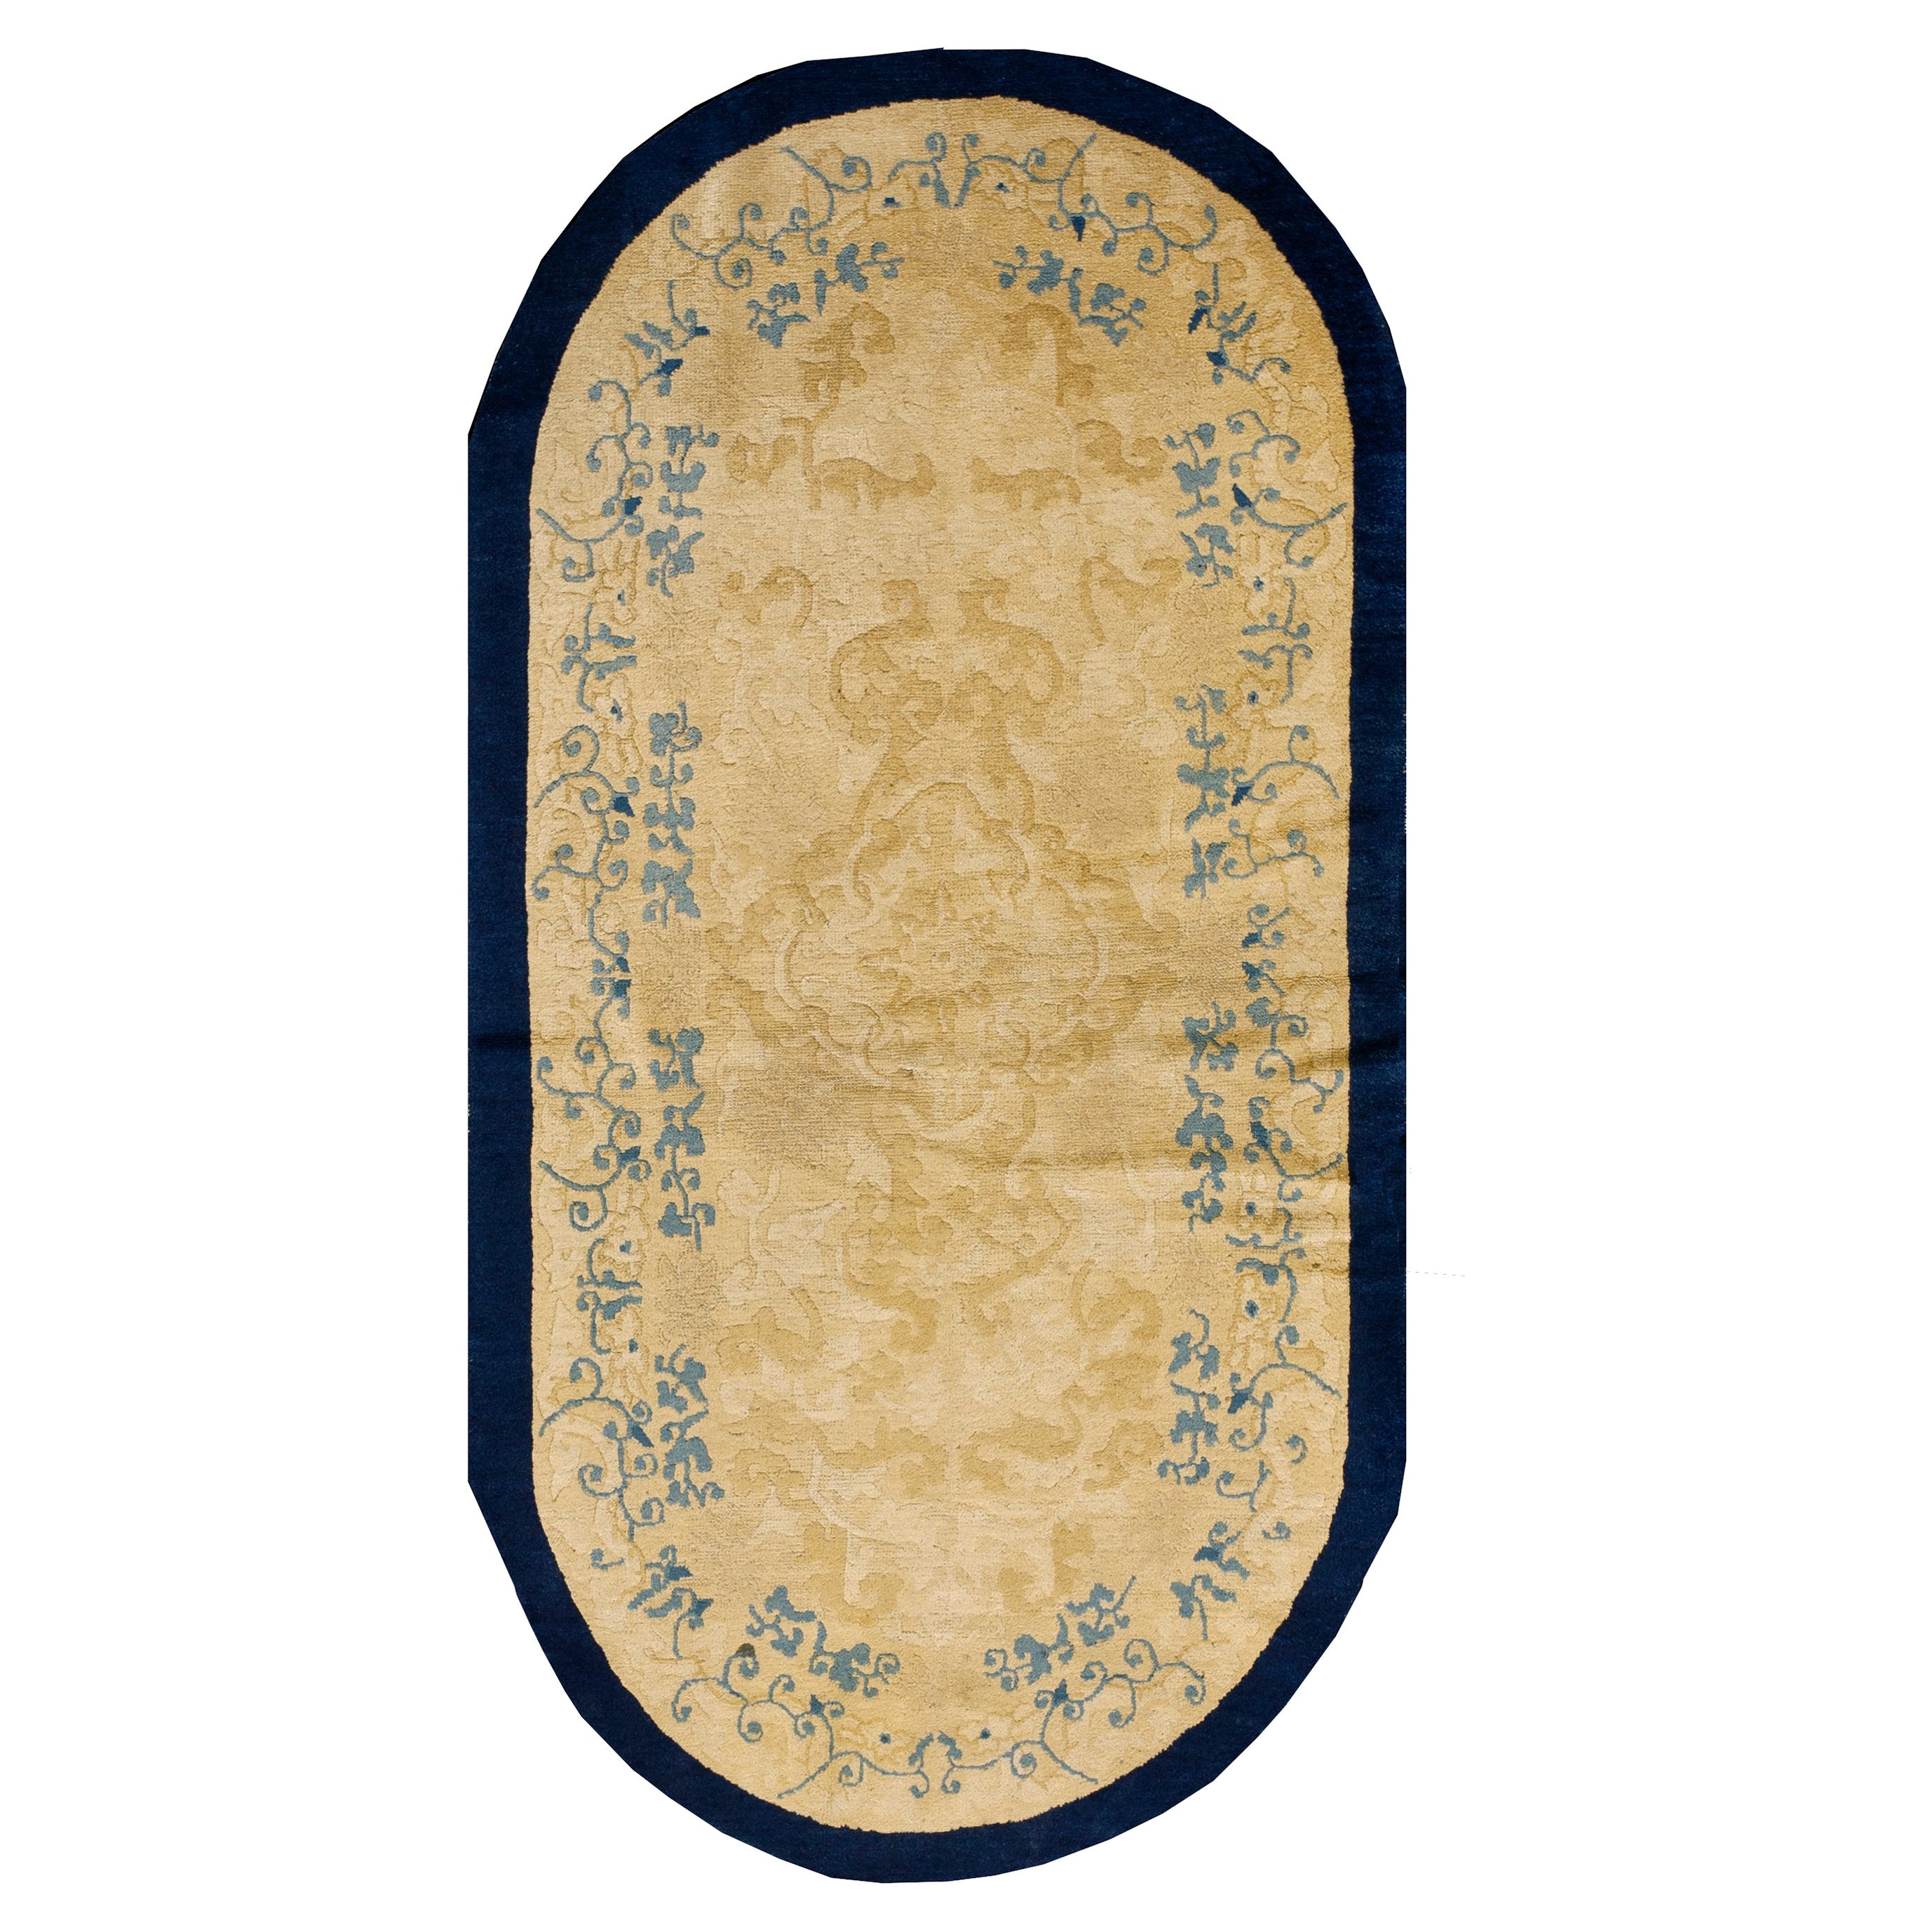 Early 20th Century Oval Chinese Peking Rug ( 3' x 5'9'' - 90 x 175 )